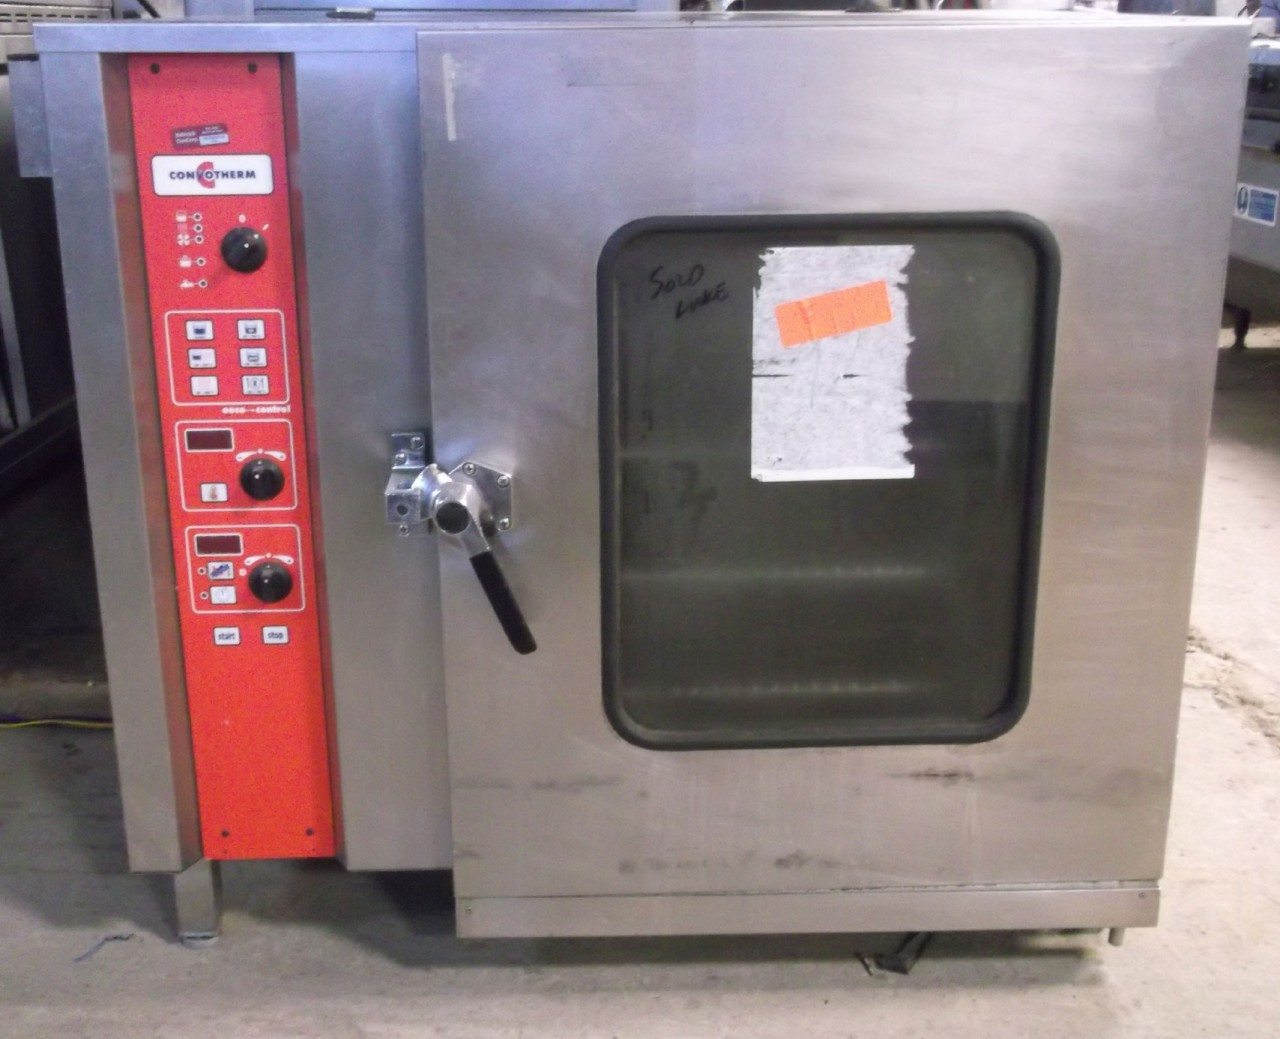 CONVOTHERM 10 Grid Combi Oven CLEARANCE ITEM 1